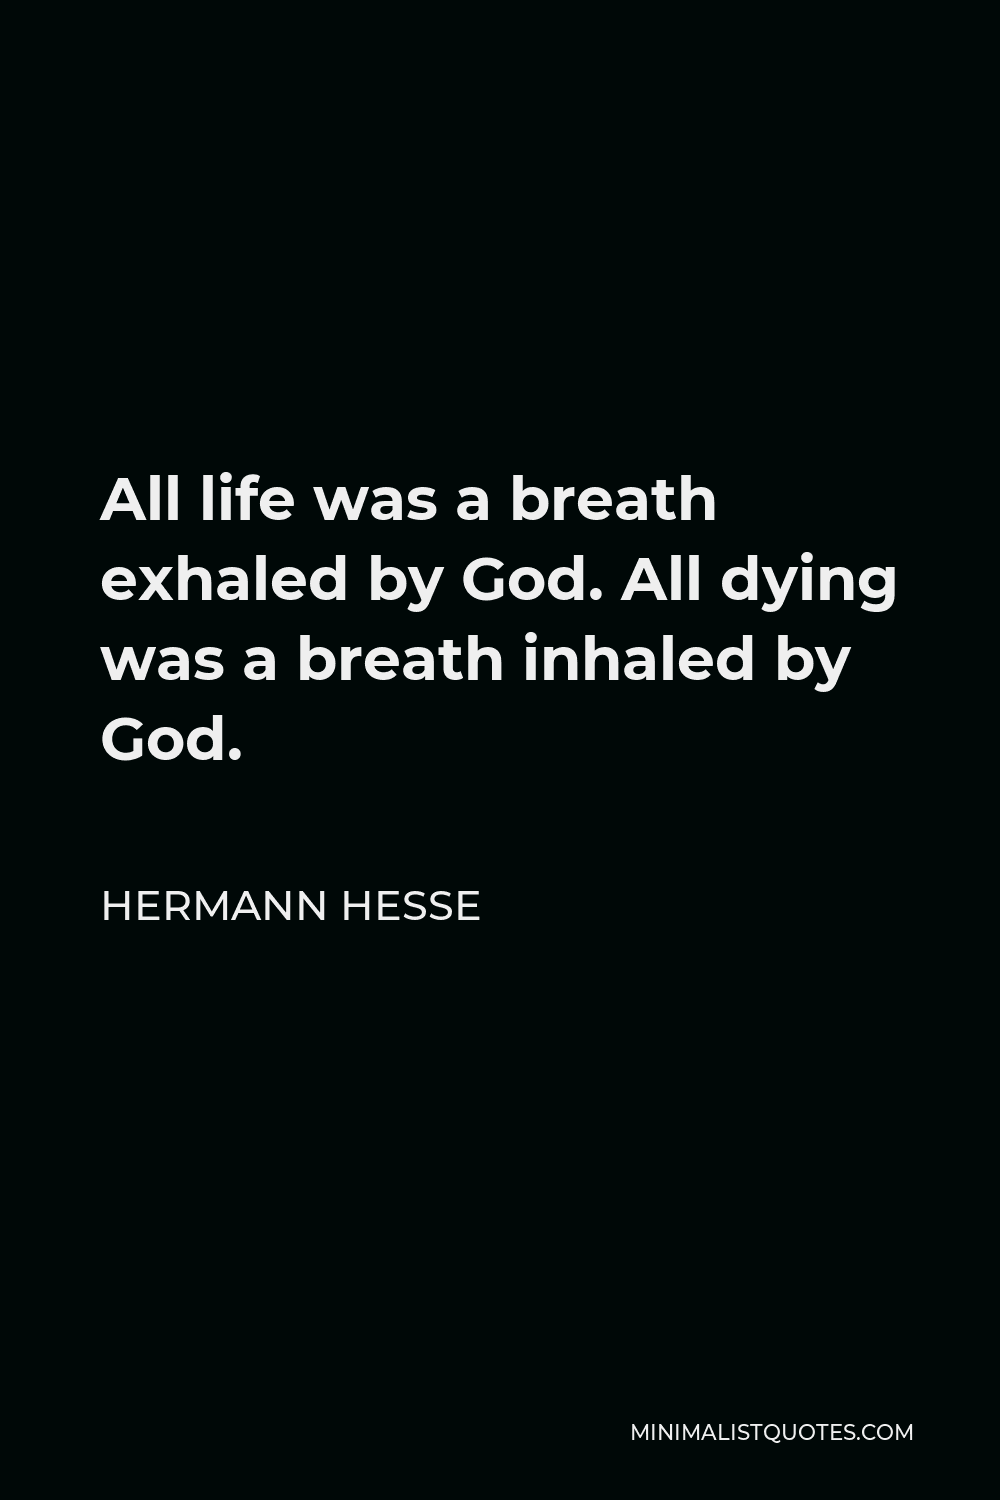 Hermann Hesse Quote - All life was a breath exhaled by God. All dying was a breath inhaled by God.